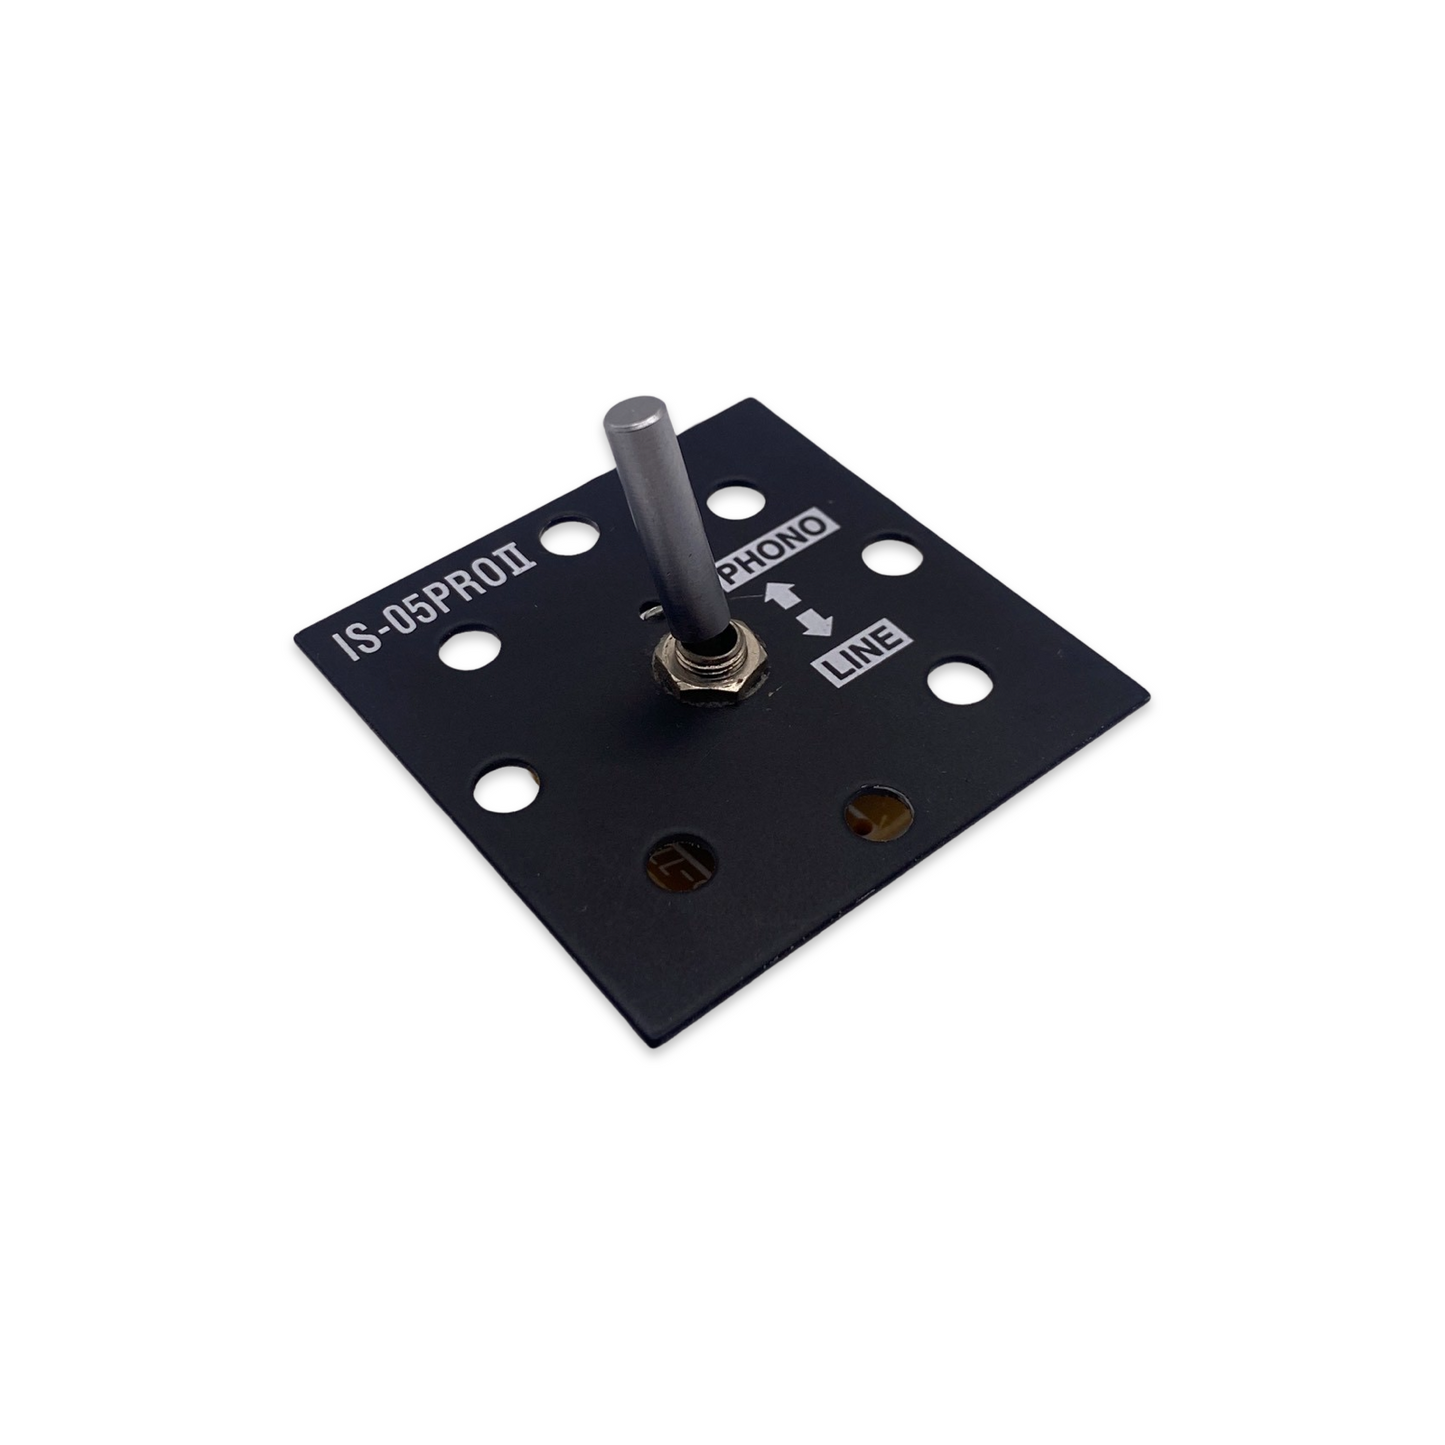 Vestax IS-05 Pro III Input Toggle Switch